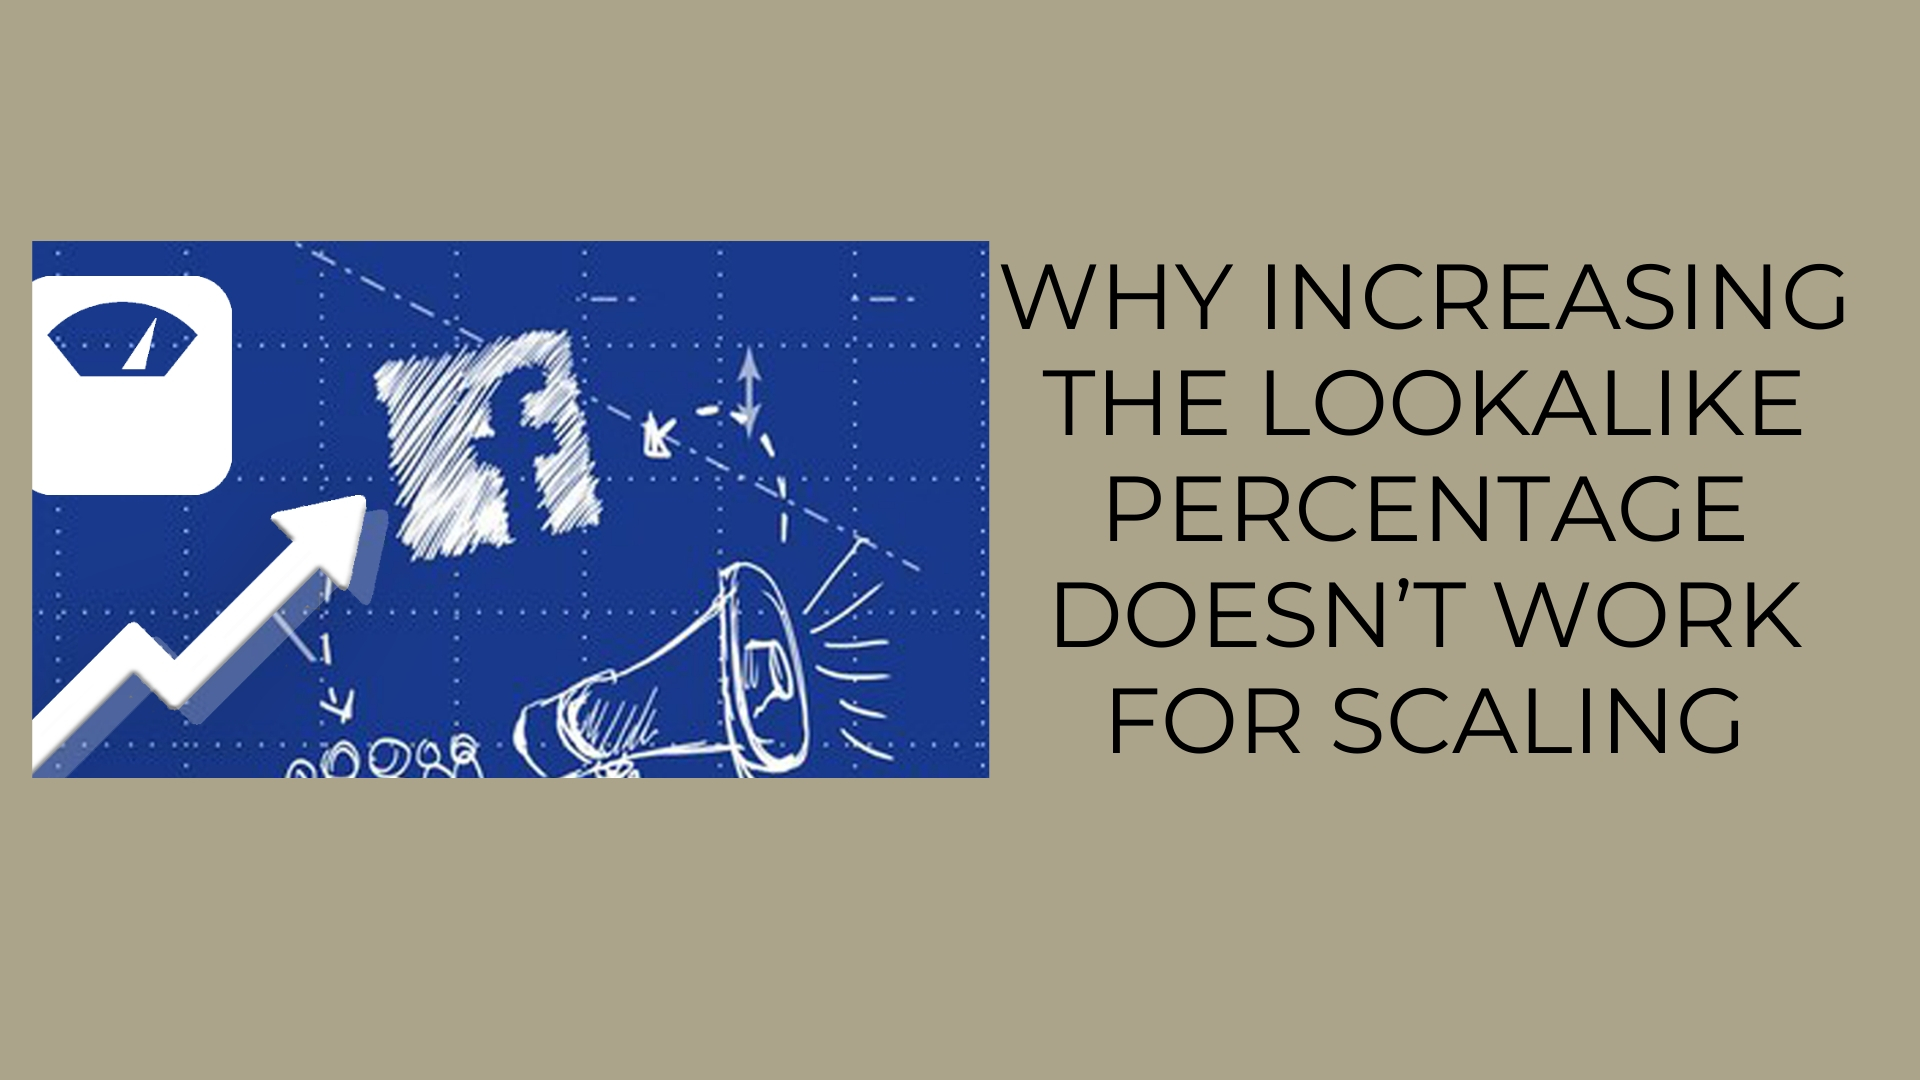 Why Increasing the Lookalike Percentage Doesn't Work for Scaling